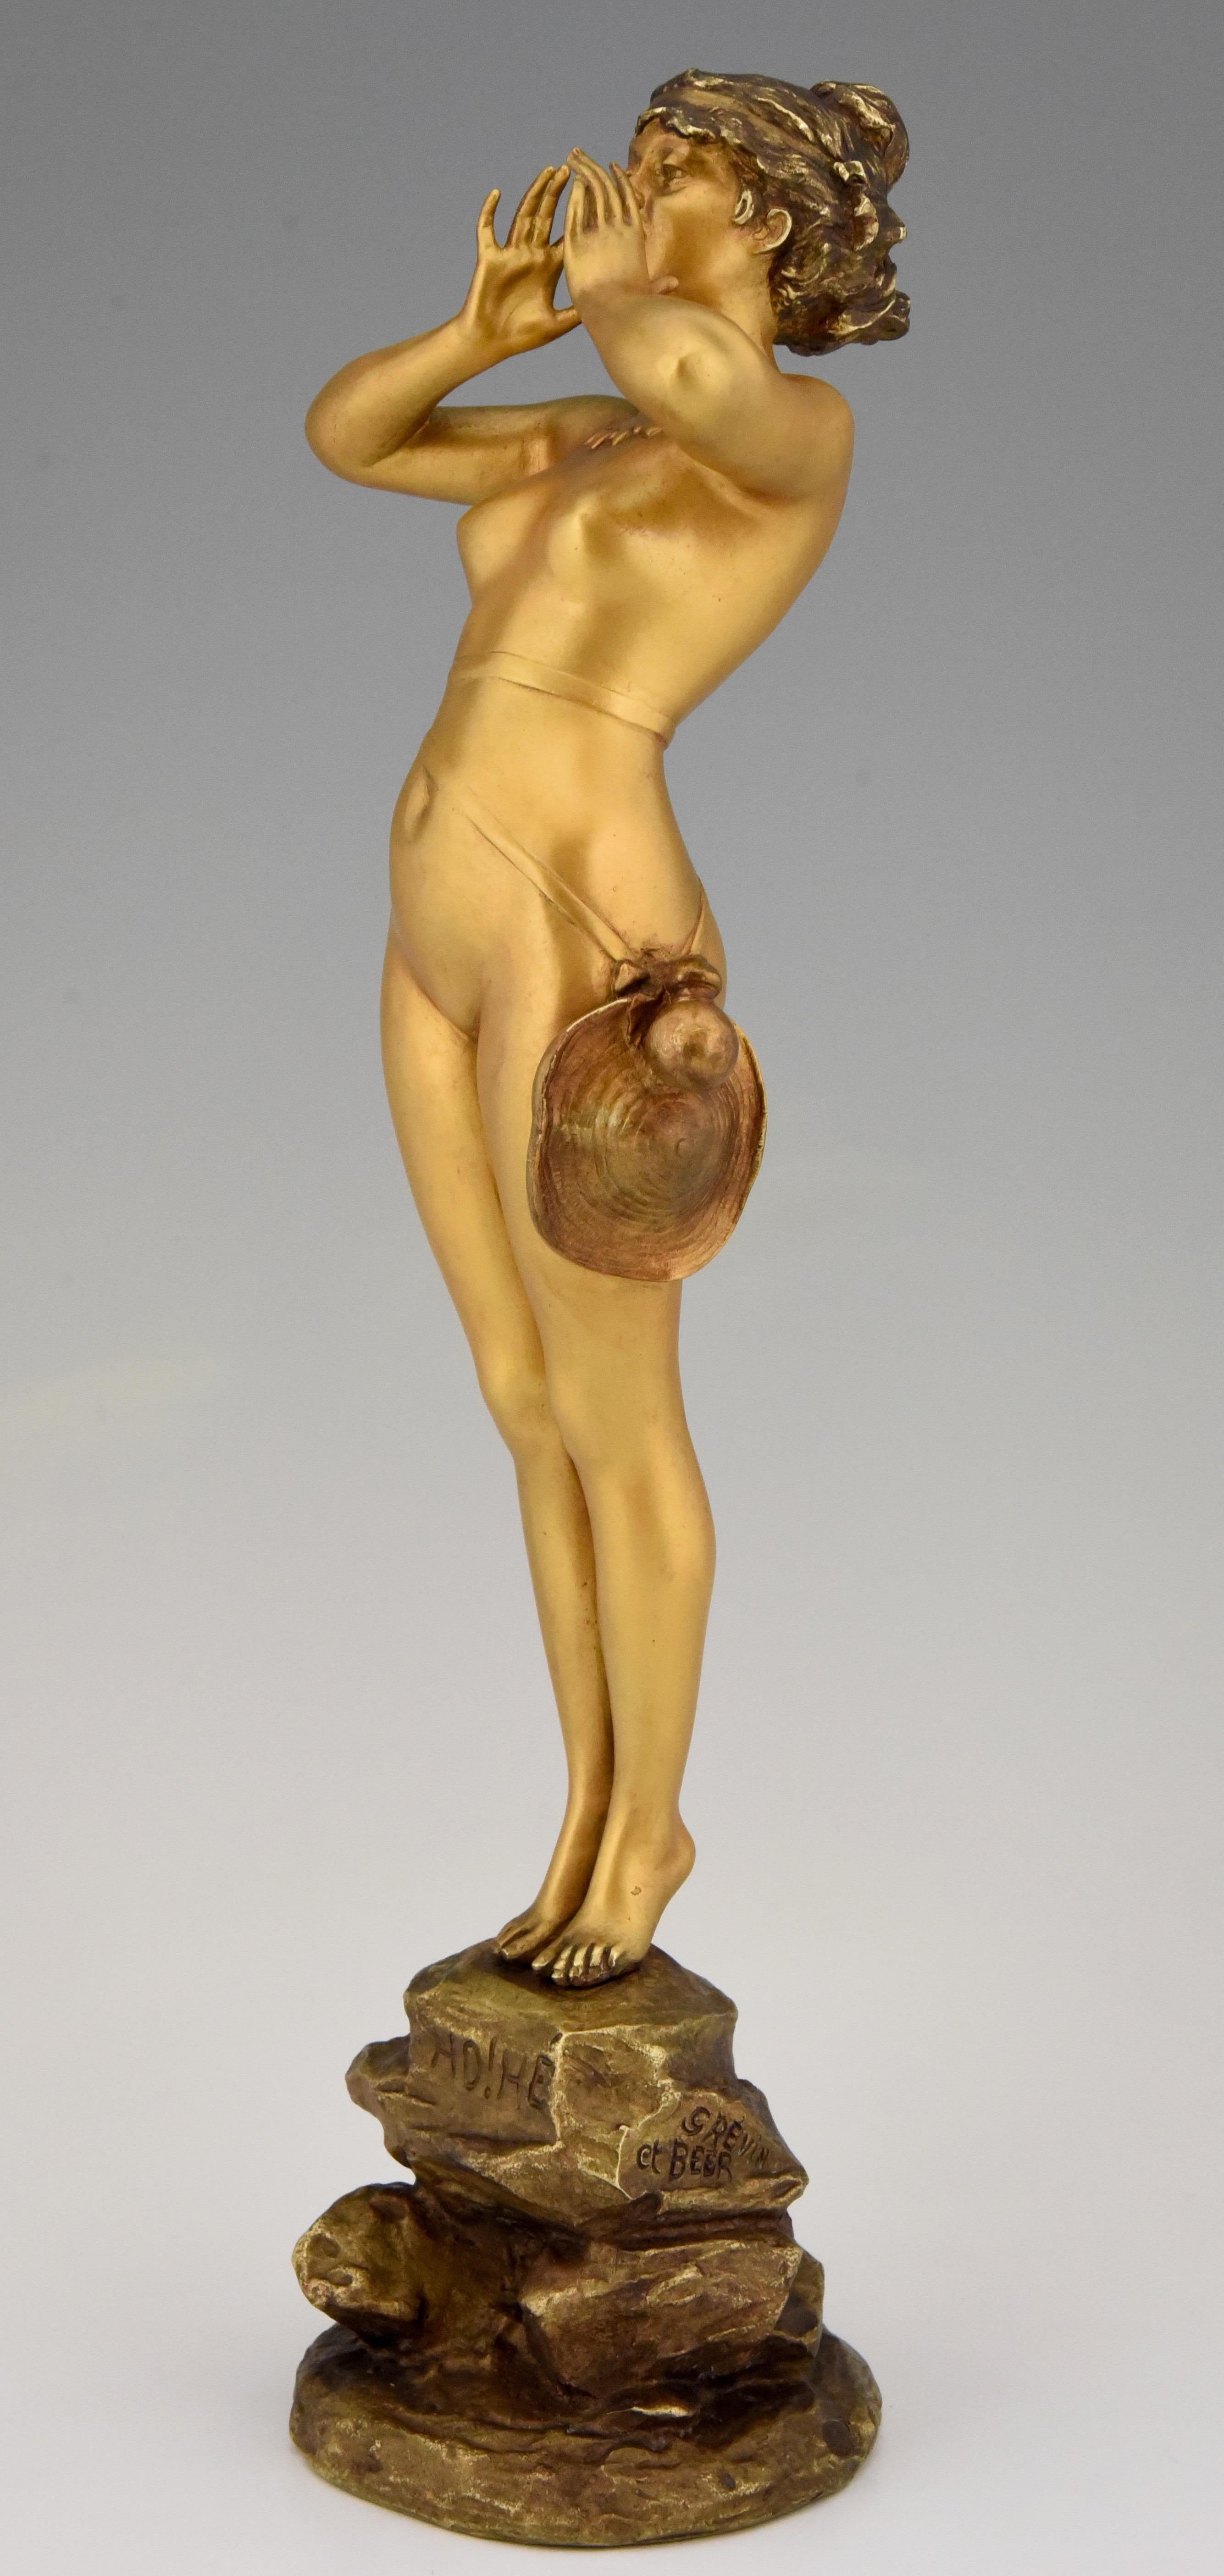 Art Nouveau bronze sculpture standing nude lady calling.
Title: “Ho, he” or Calling girl.
Signed by Alfred Grevin 1827-1892 and Friedrich Beer.
France, circa 1880. 

The same sculpture is in the collection of the Museum of Chambery. ??This